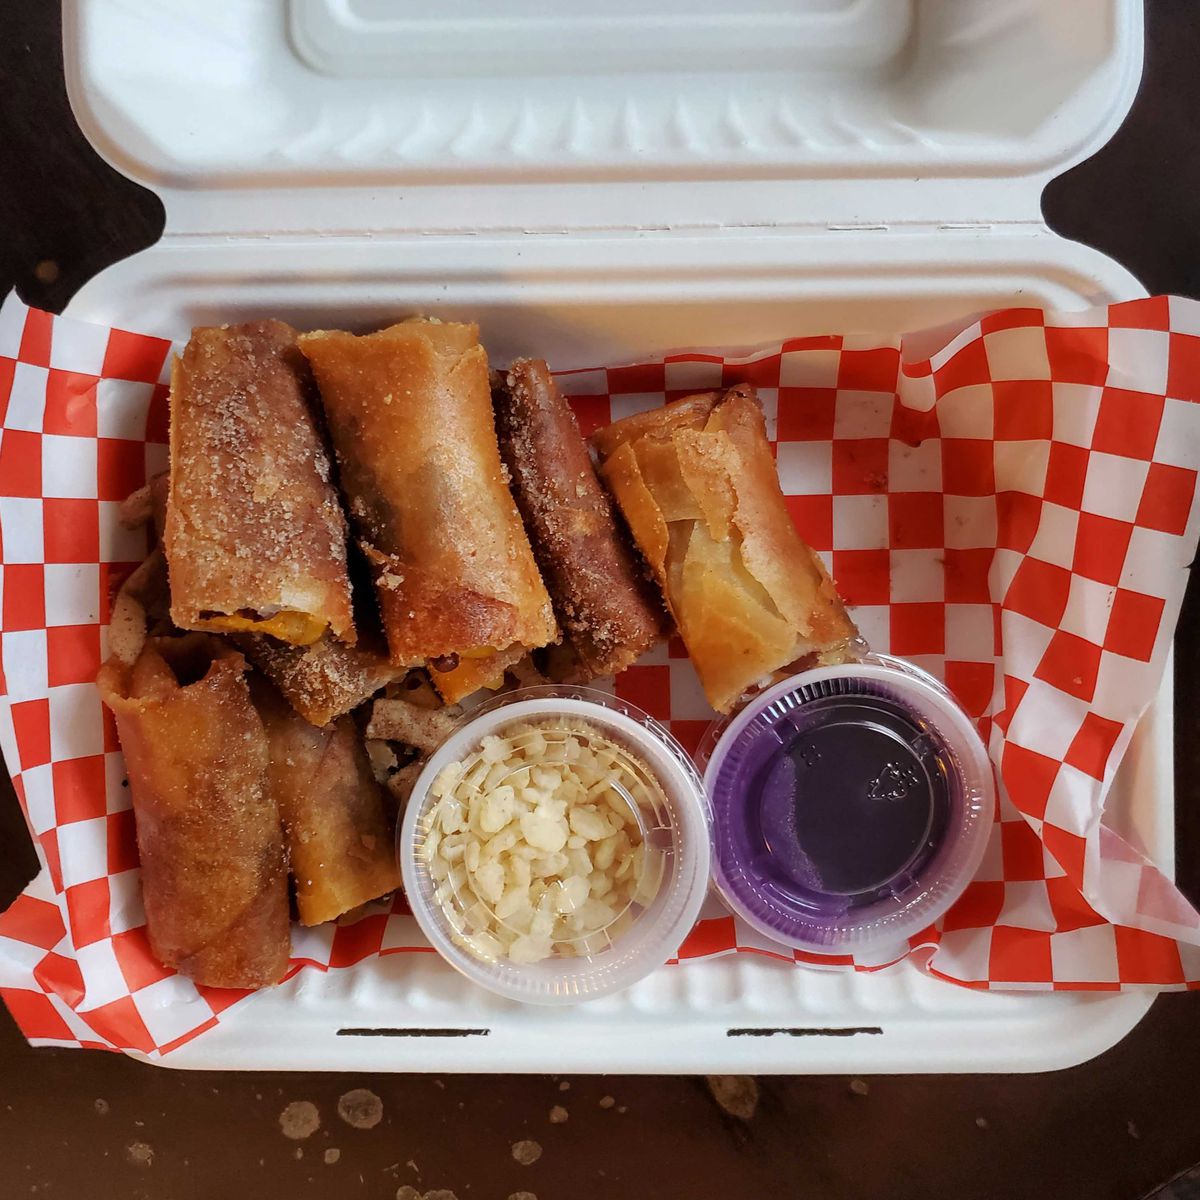 Pieces of banana are wrapped in a fried, crispy lumpia wrapper with small sauce containers of ube dipping sauce and Rice Krispies cereal.